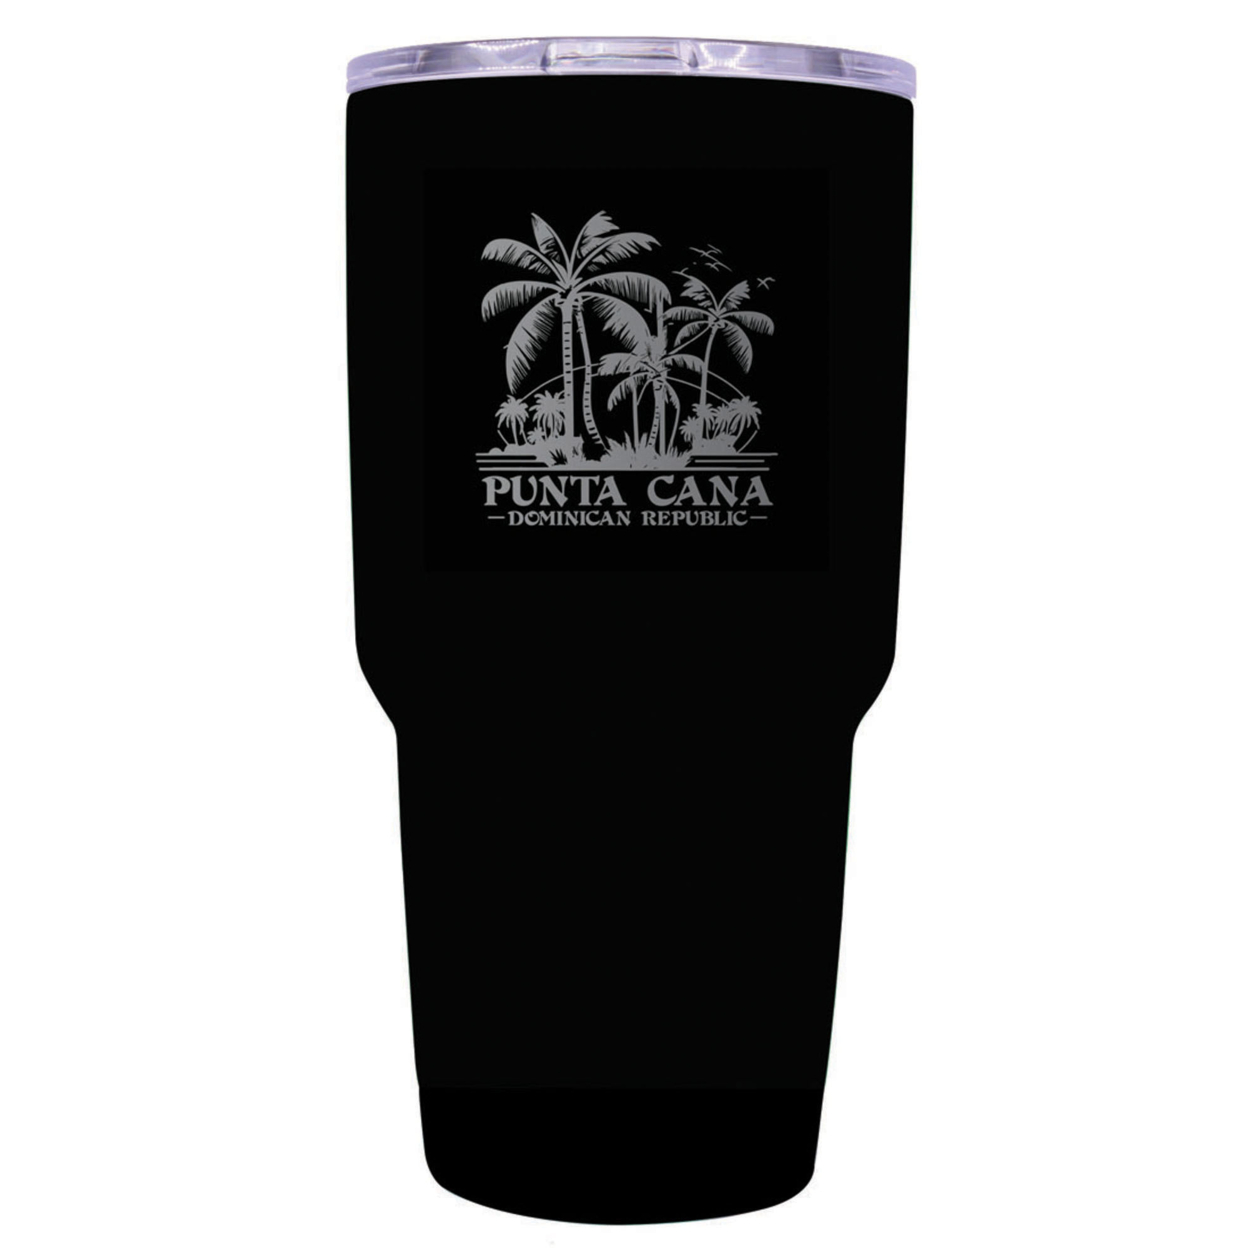 Punta Cana Dominican Republic Souvenir 24 Oz Insulated Stainless Steel Tumbler Etched - Black, PALMS